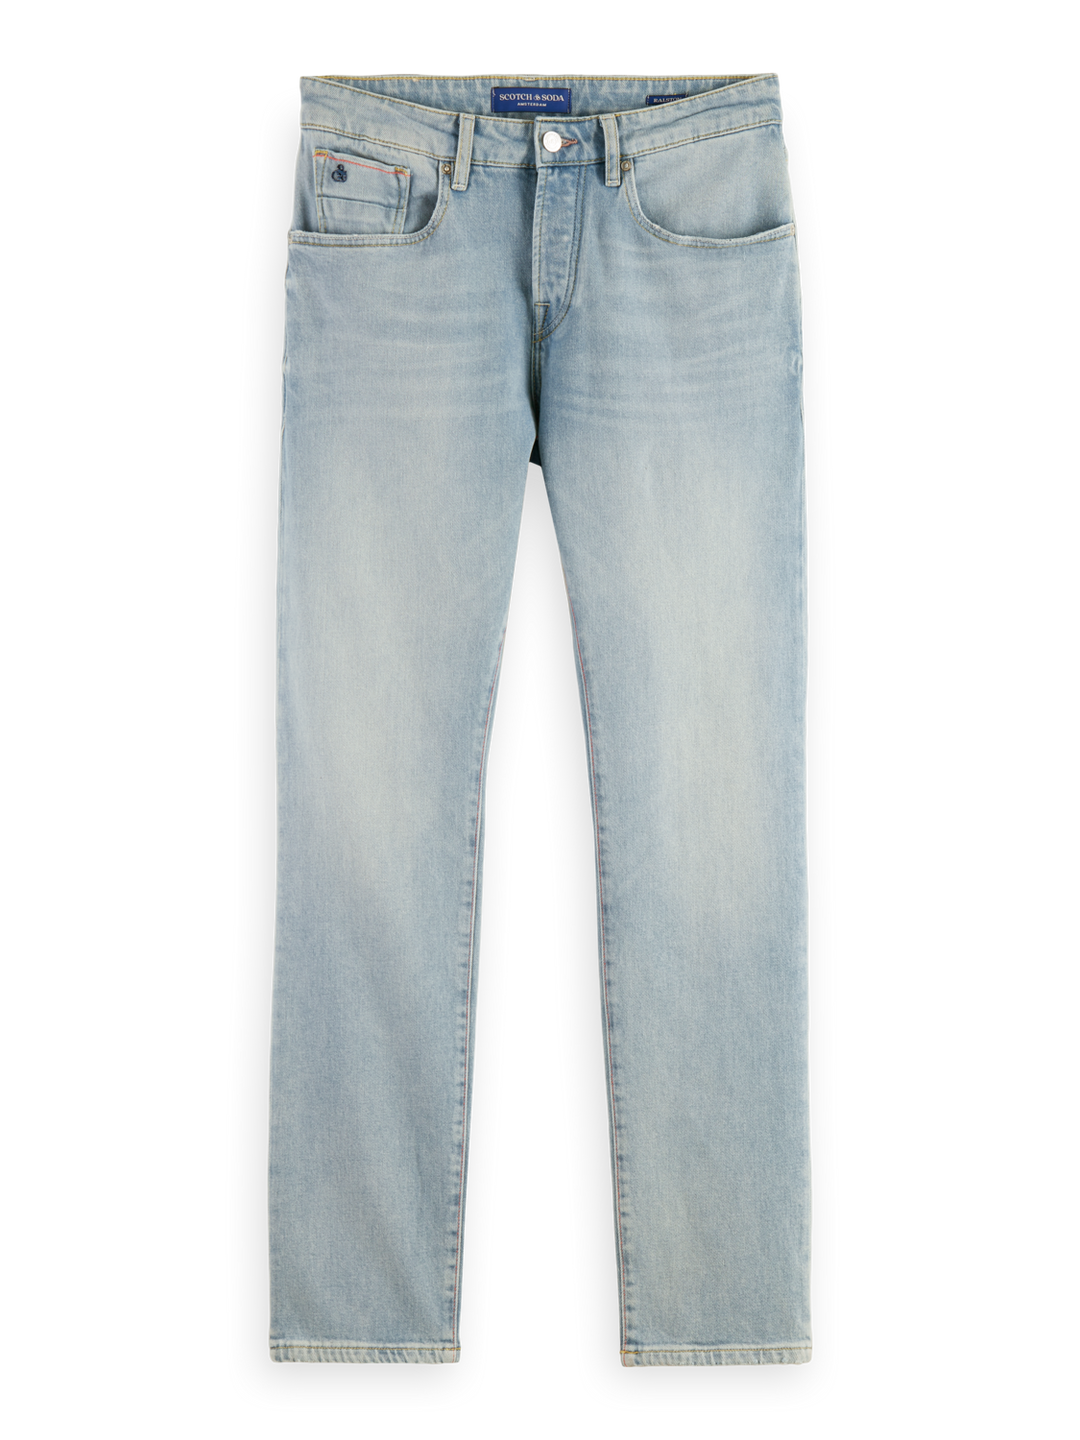 Ralston Blue Skies Regular Slim Fit Jeans | Buster McGee Daylesford